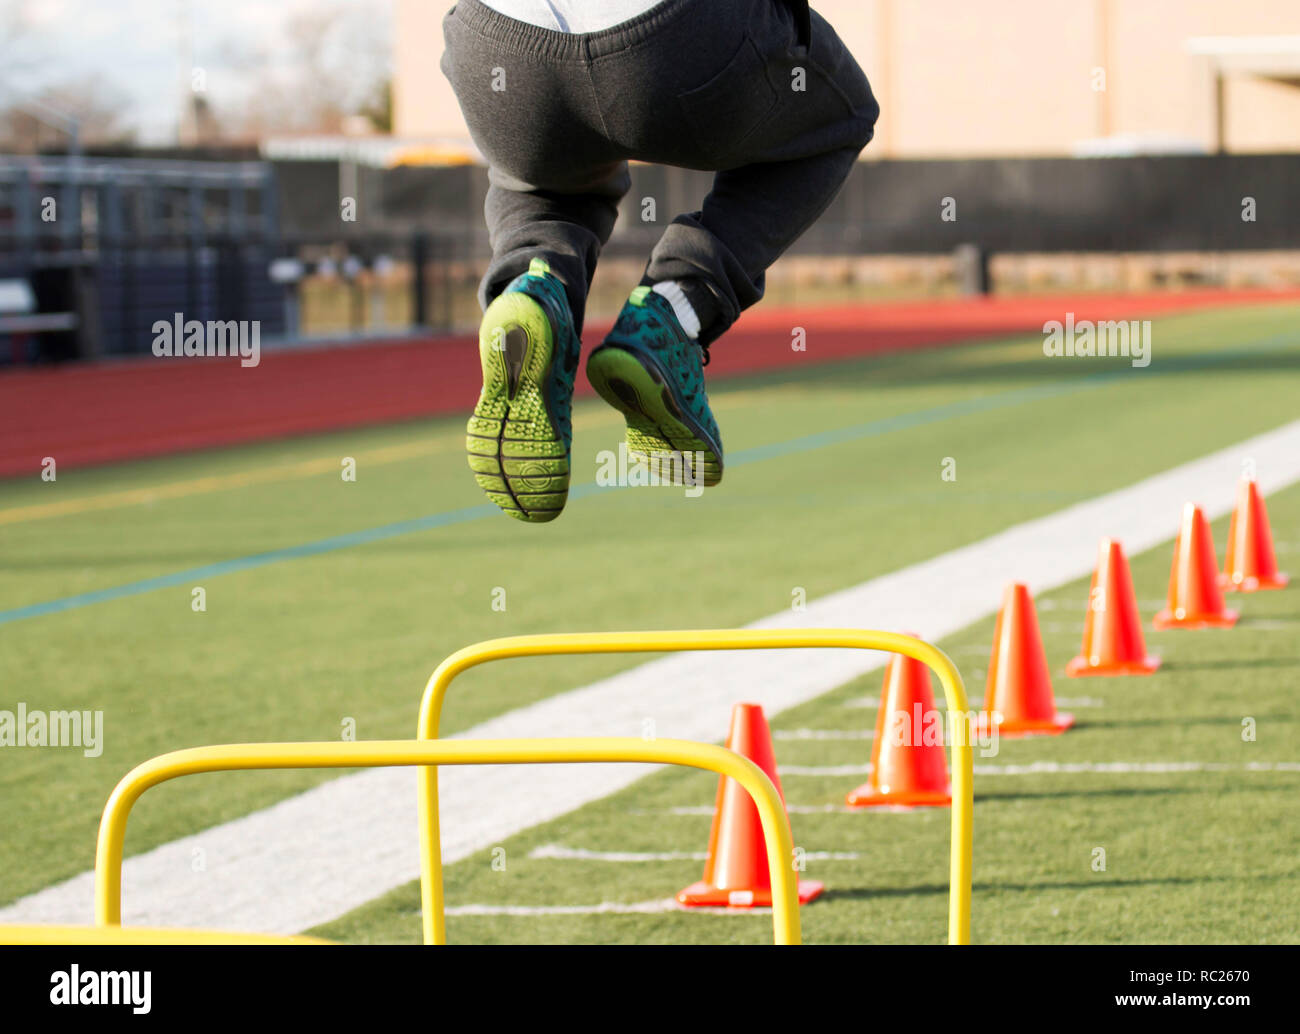 A track and field athlete jumps over yellow hurdles before he runs over orange cones, all on a green turf field Stock Photo